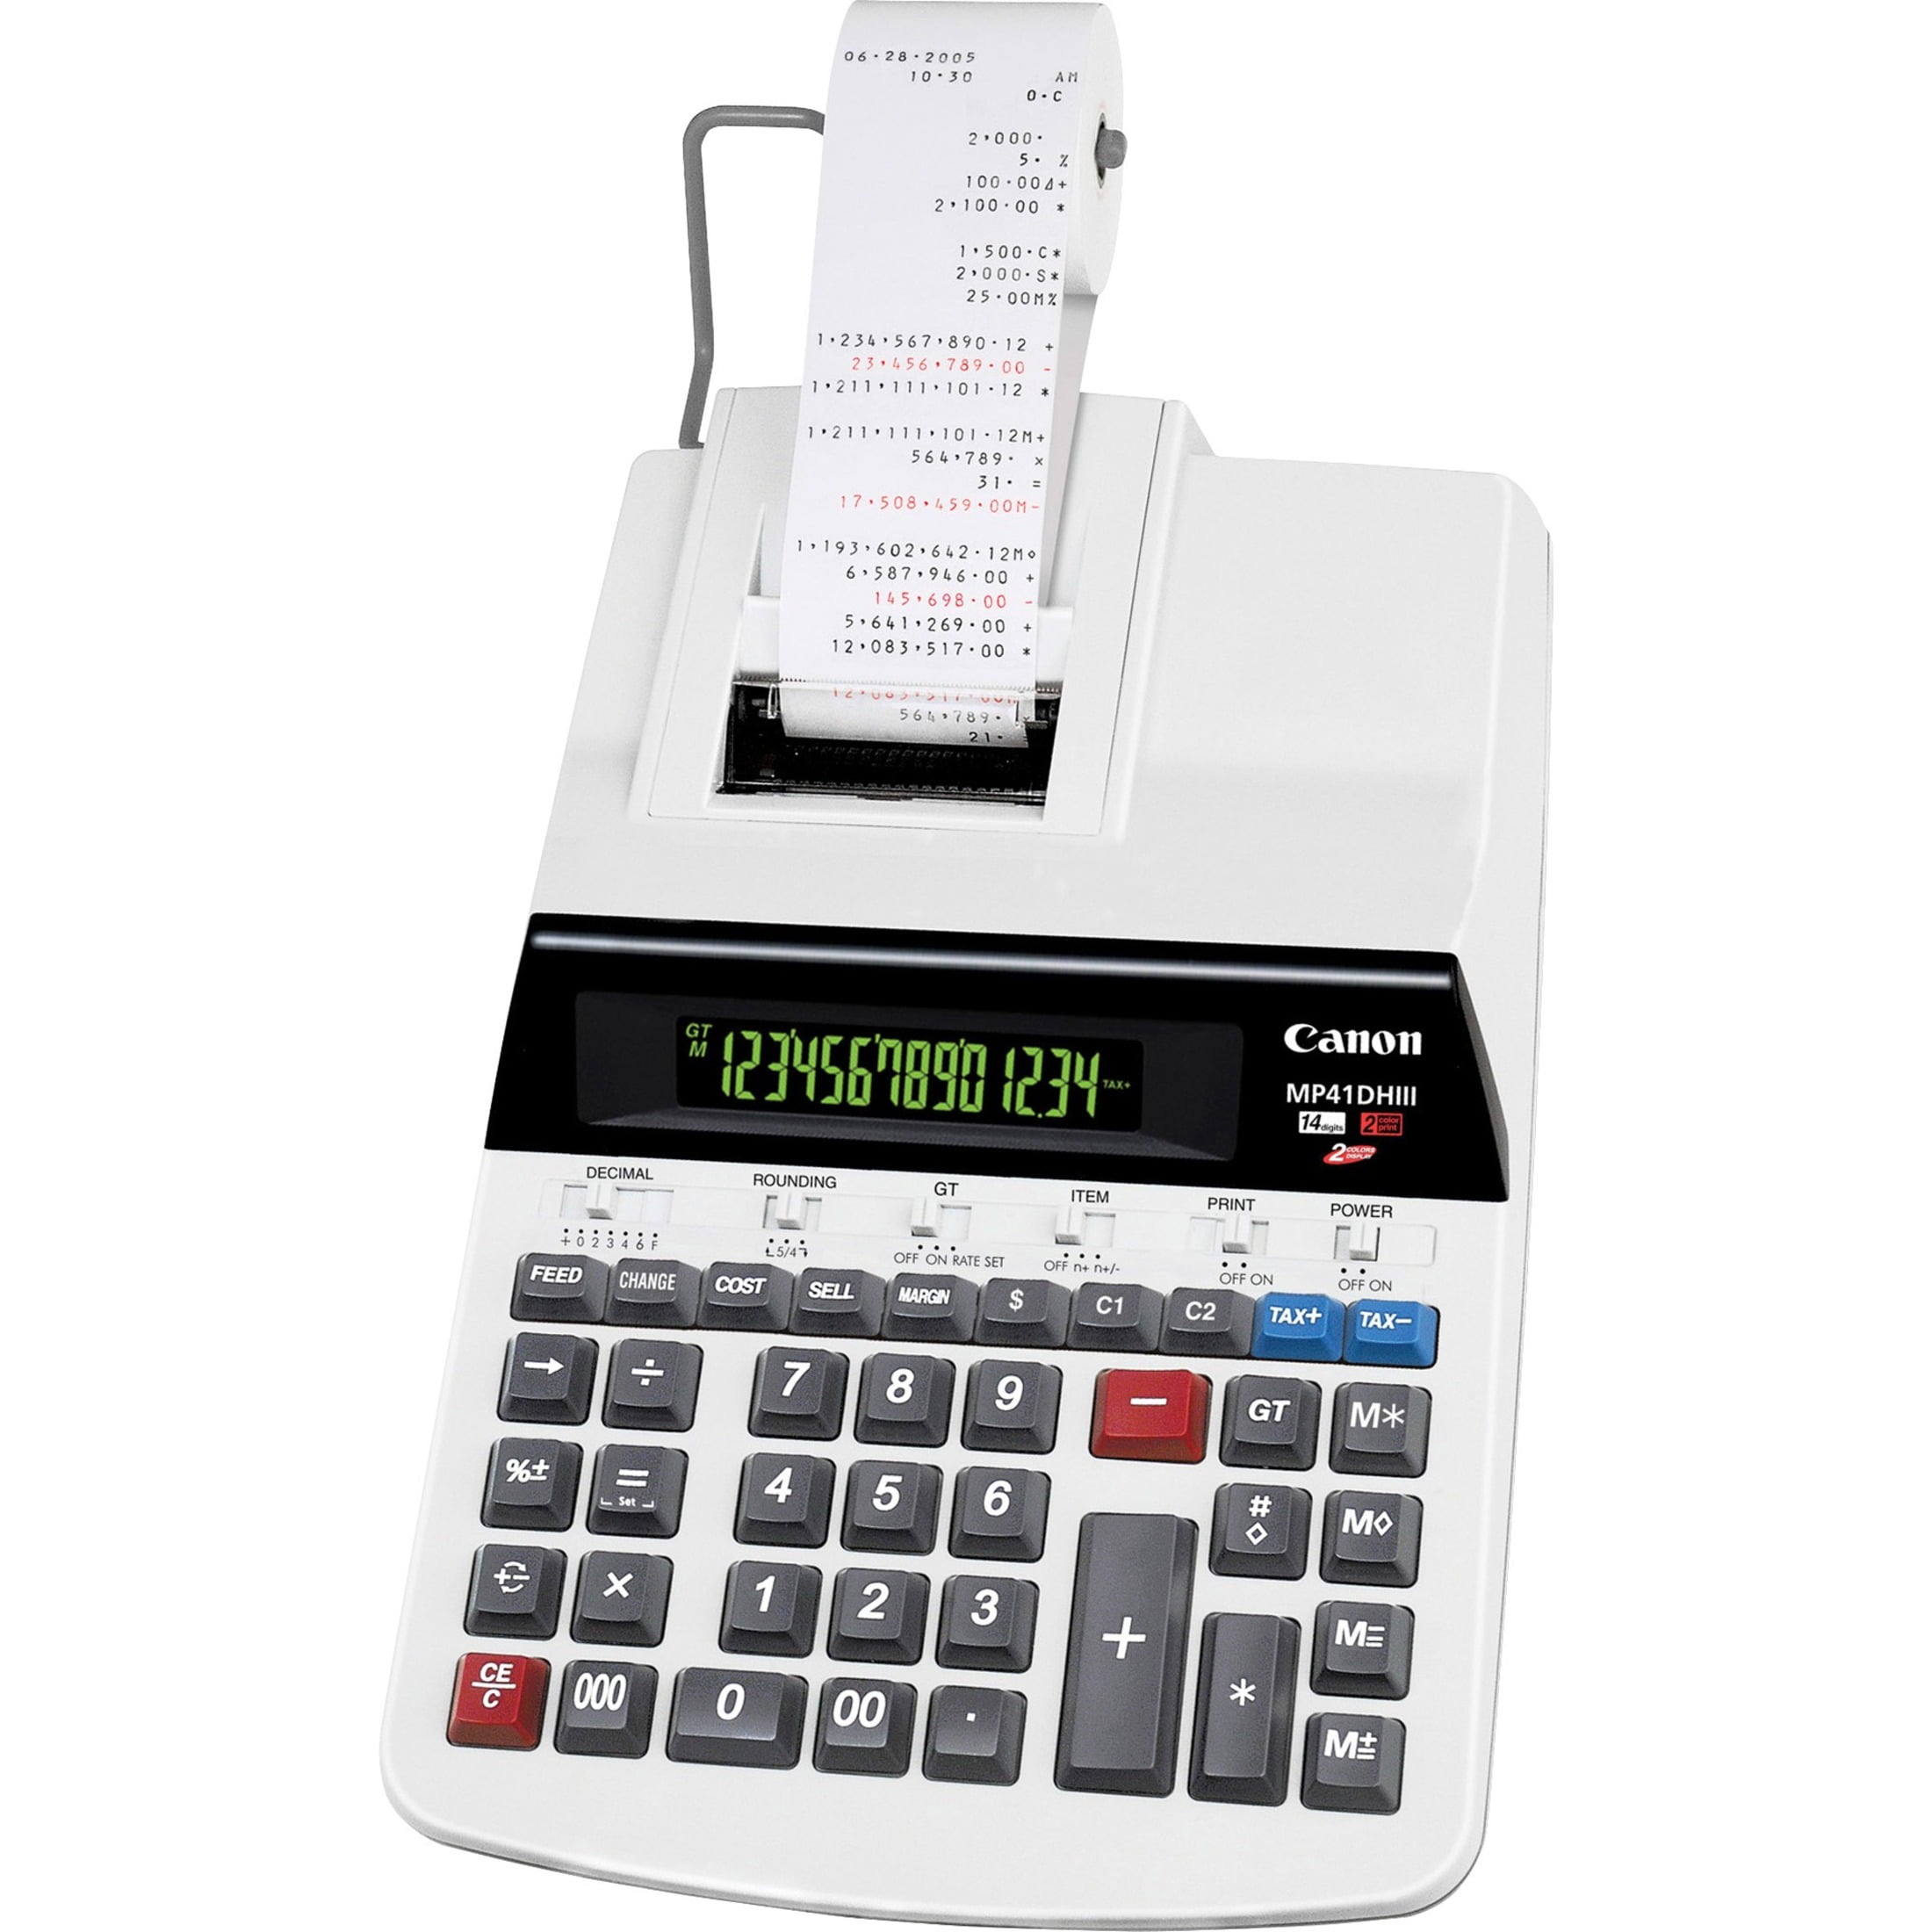 Canon MP11DX Printing Calculator for sale online 